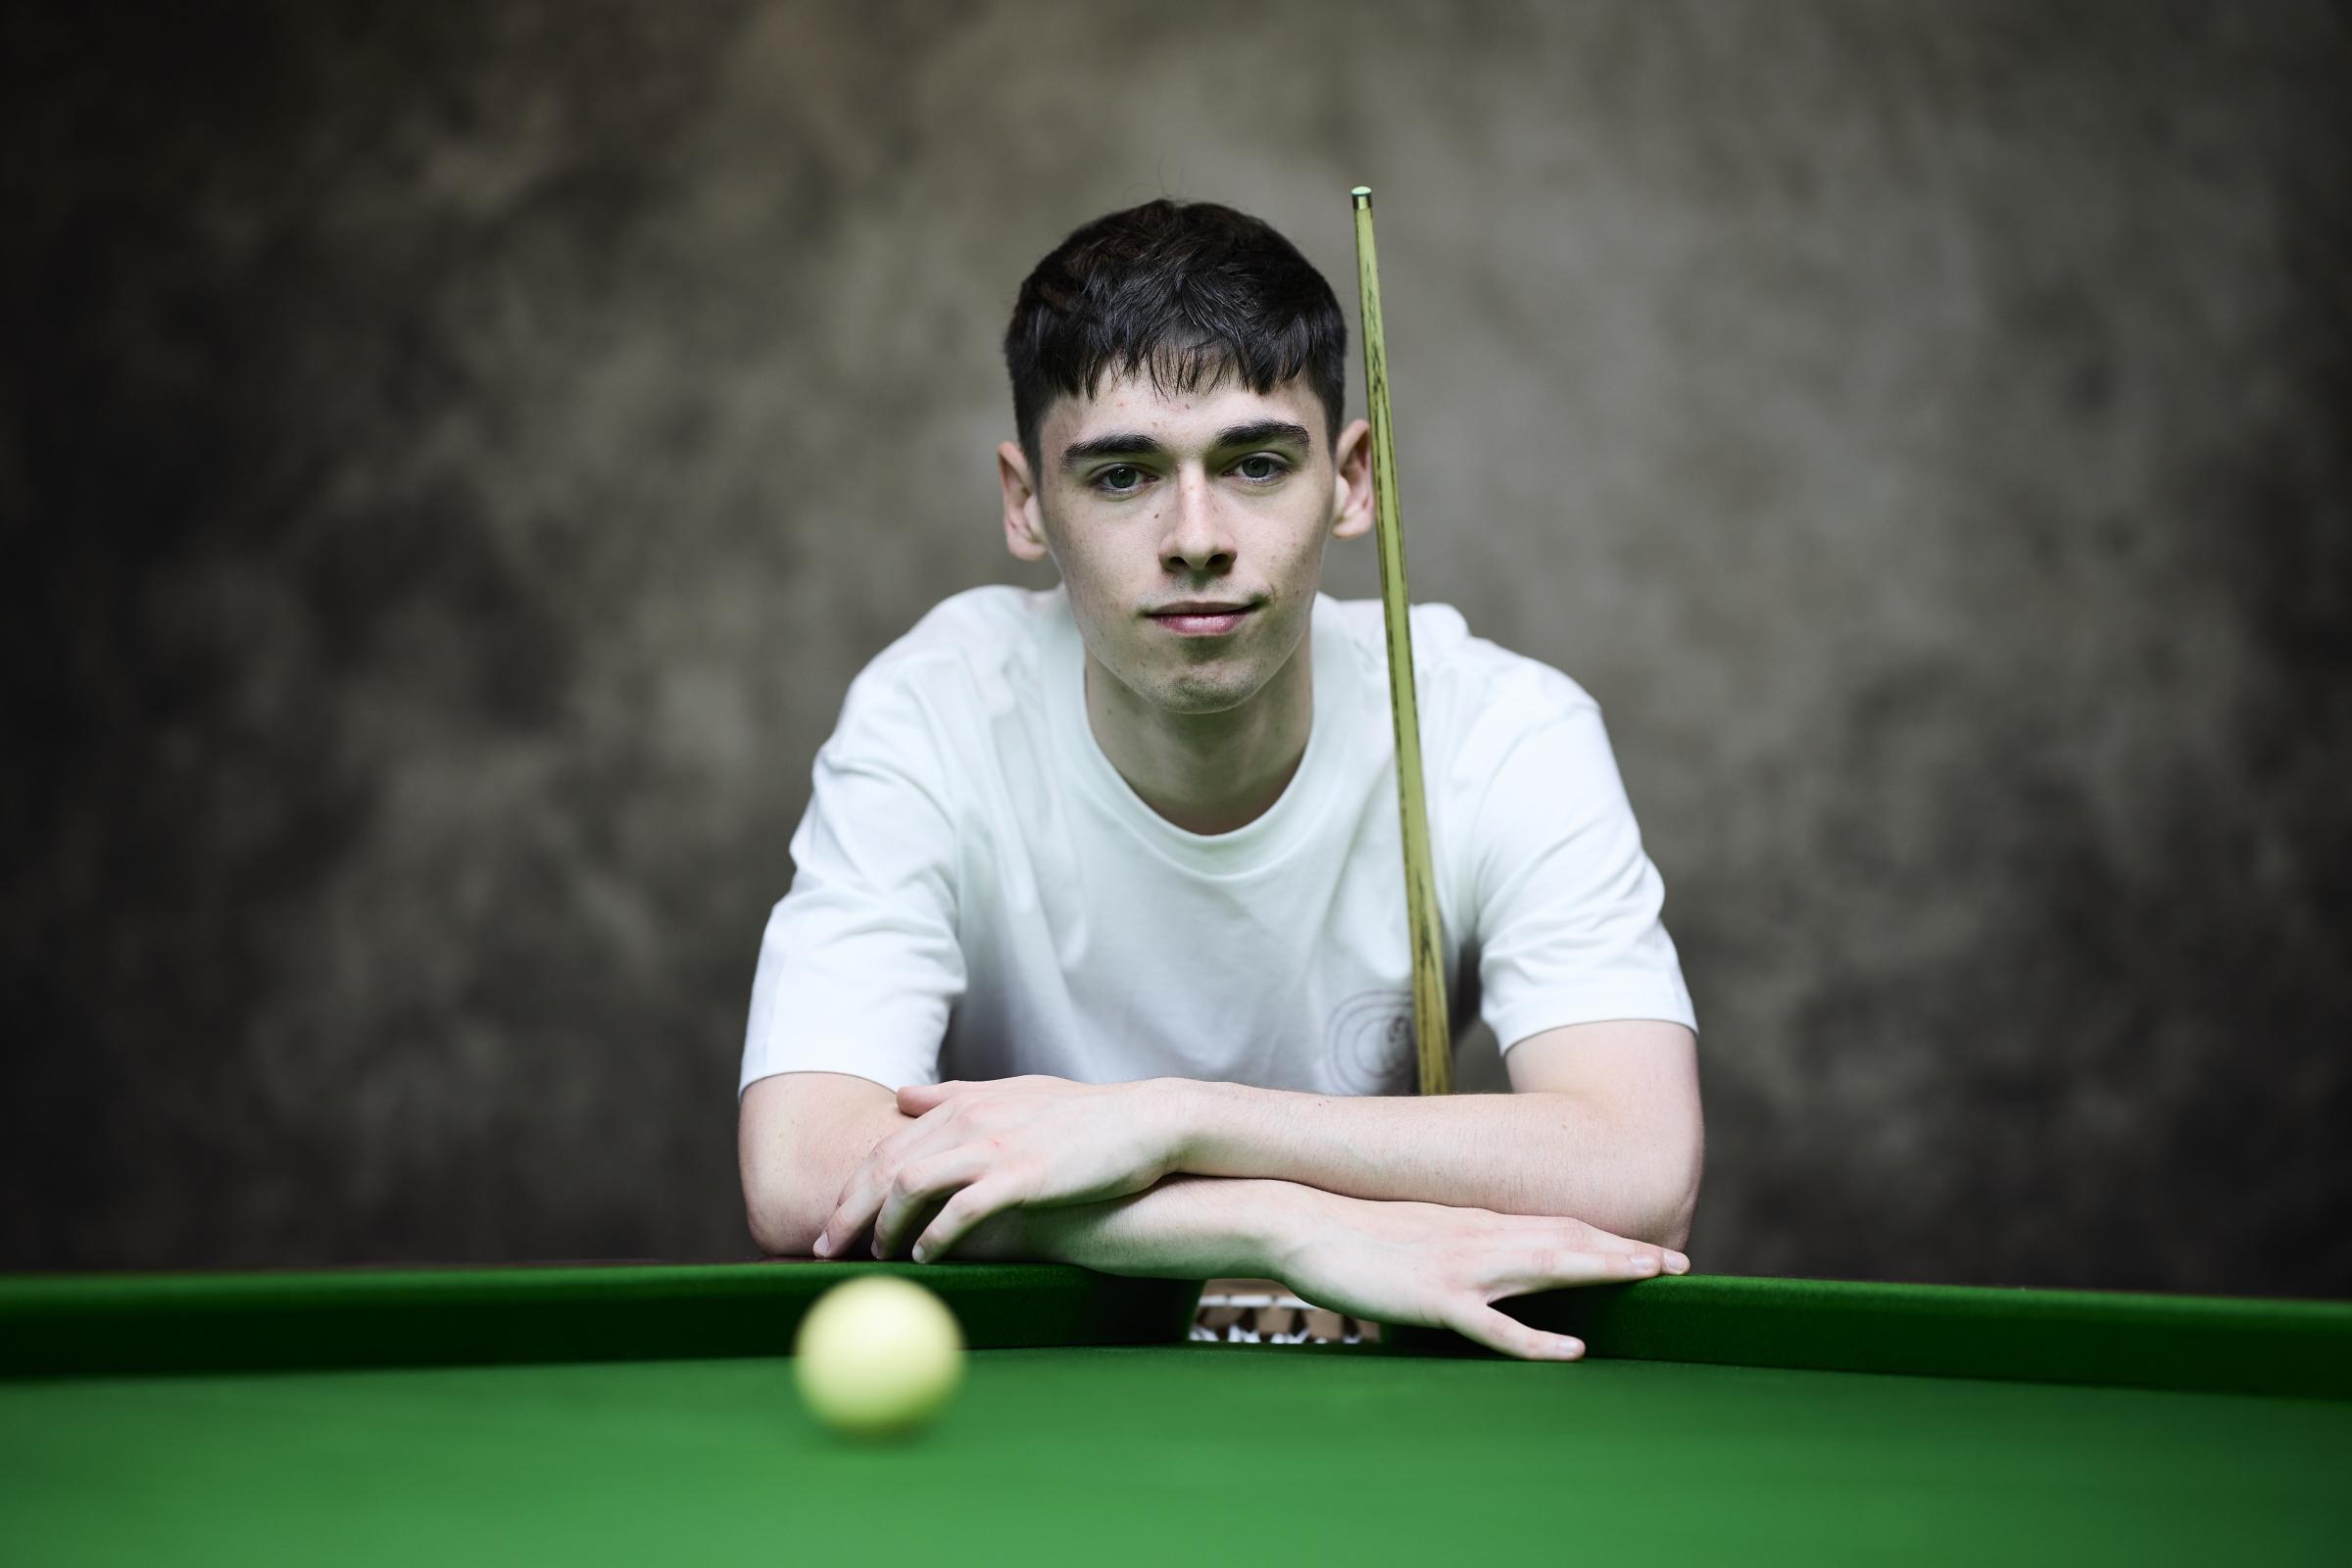 Liam Graham is snookers new kid on the block